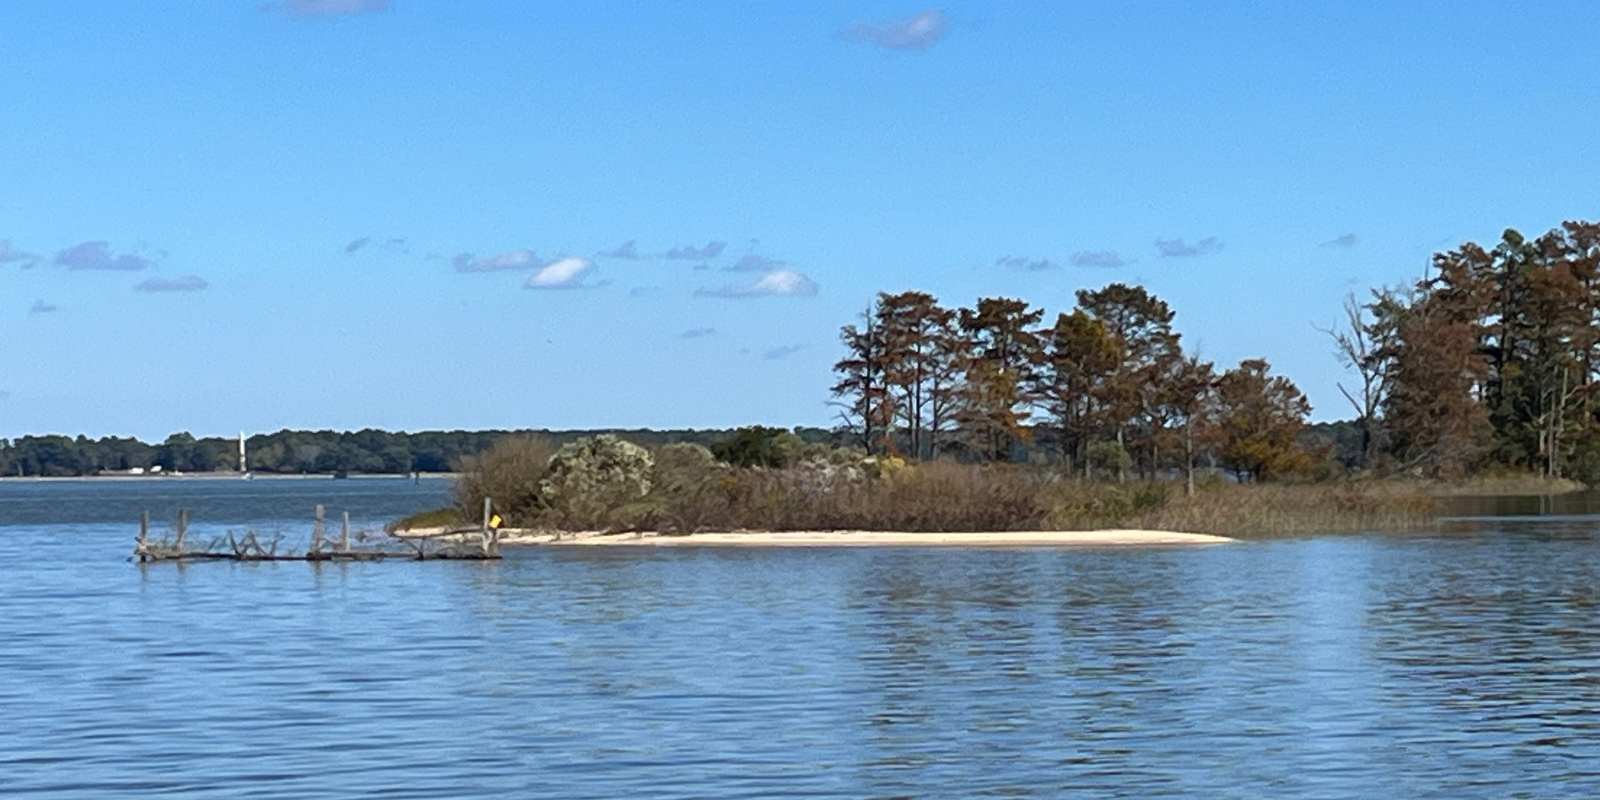 An image of the mouth of grey's creek near Jamestown; there are rushes and trees on the small island.